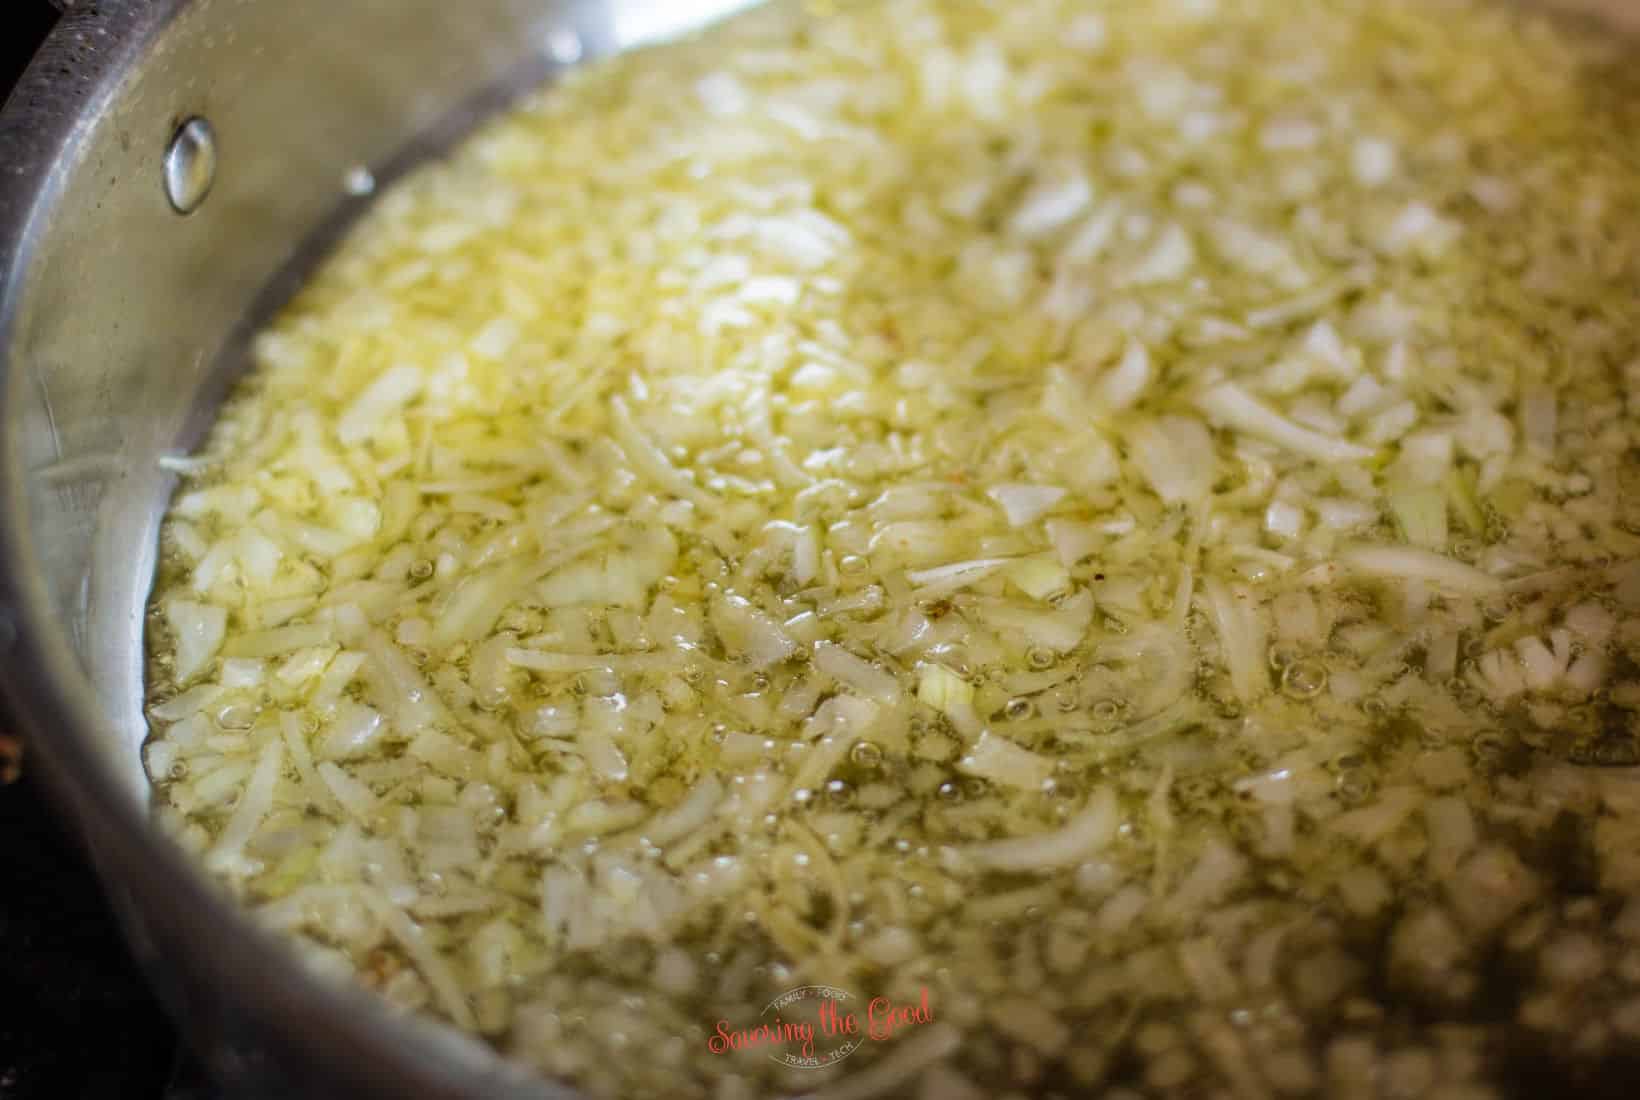 diced onions in olive oil cooking.